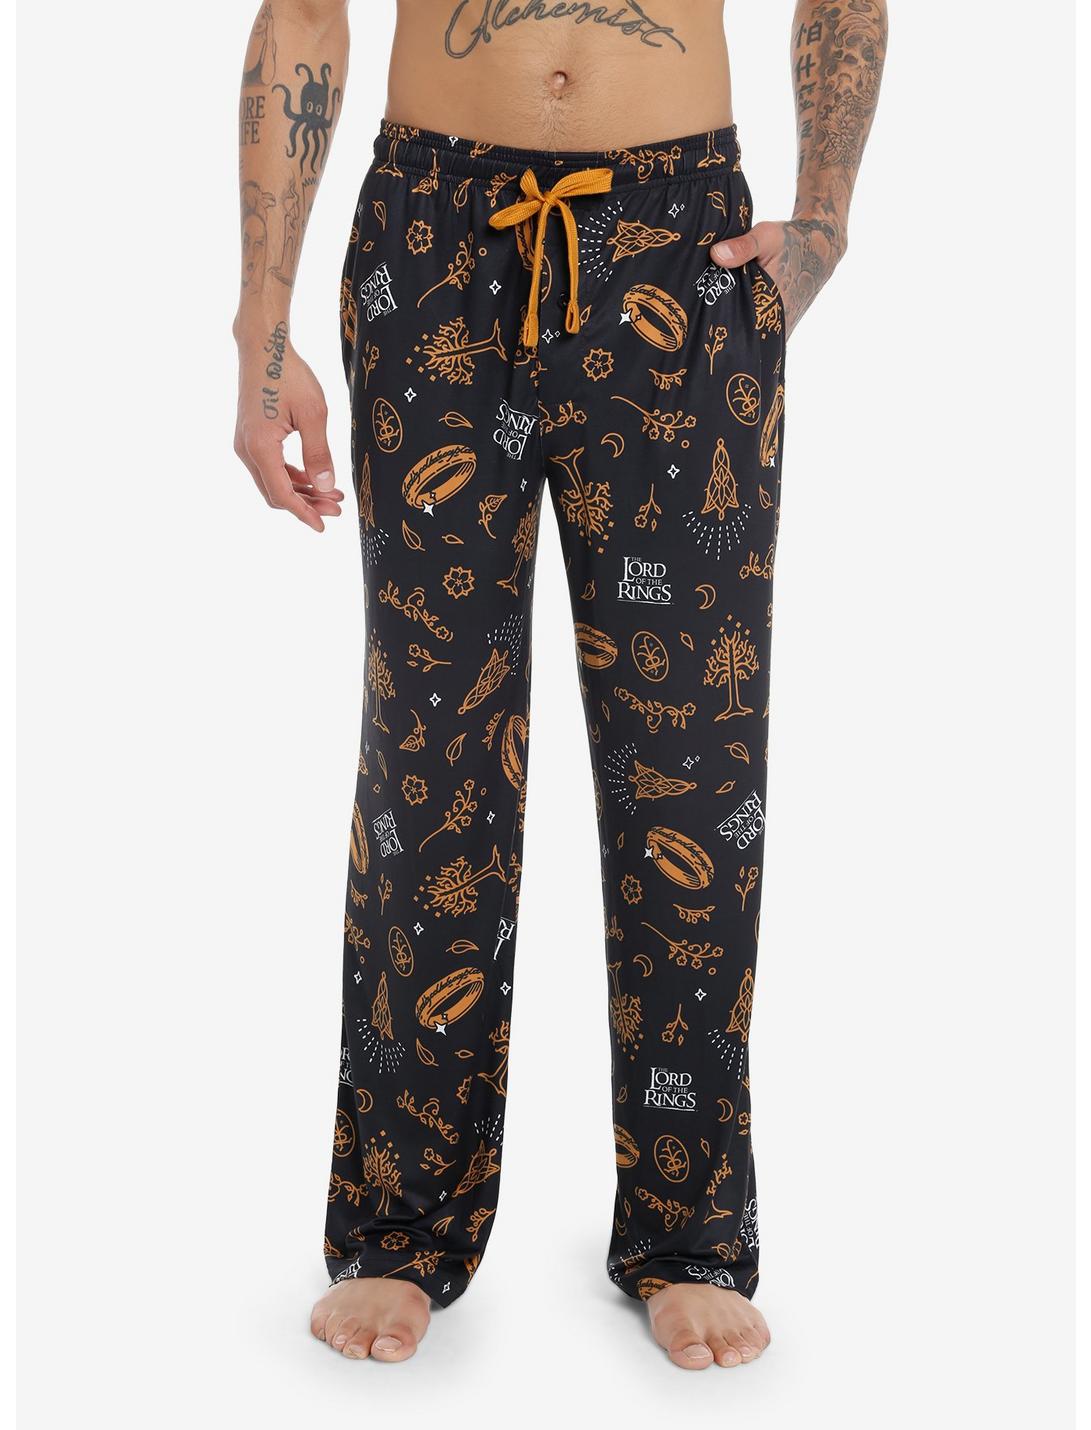 The Lord Of The Rings Icons Pajama Pants | Hot Topic